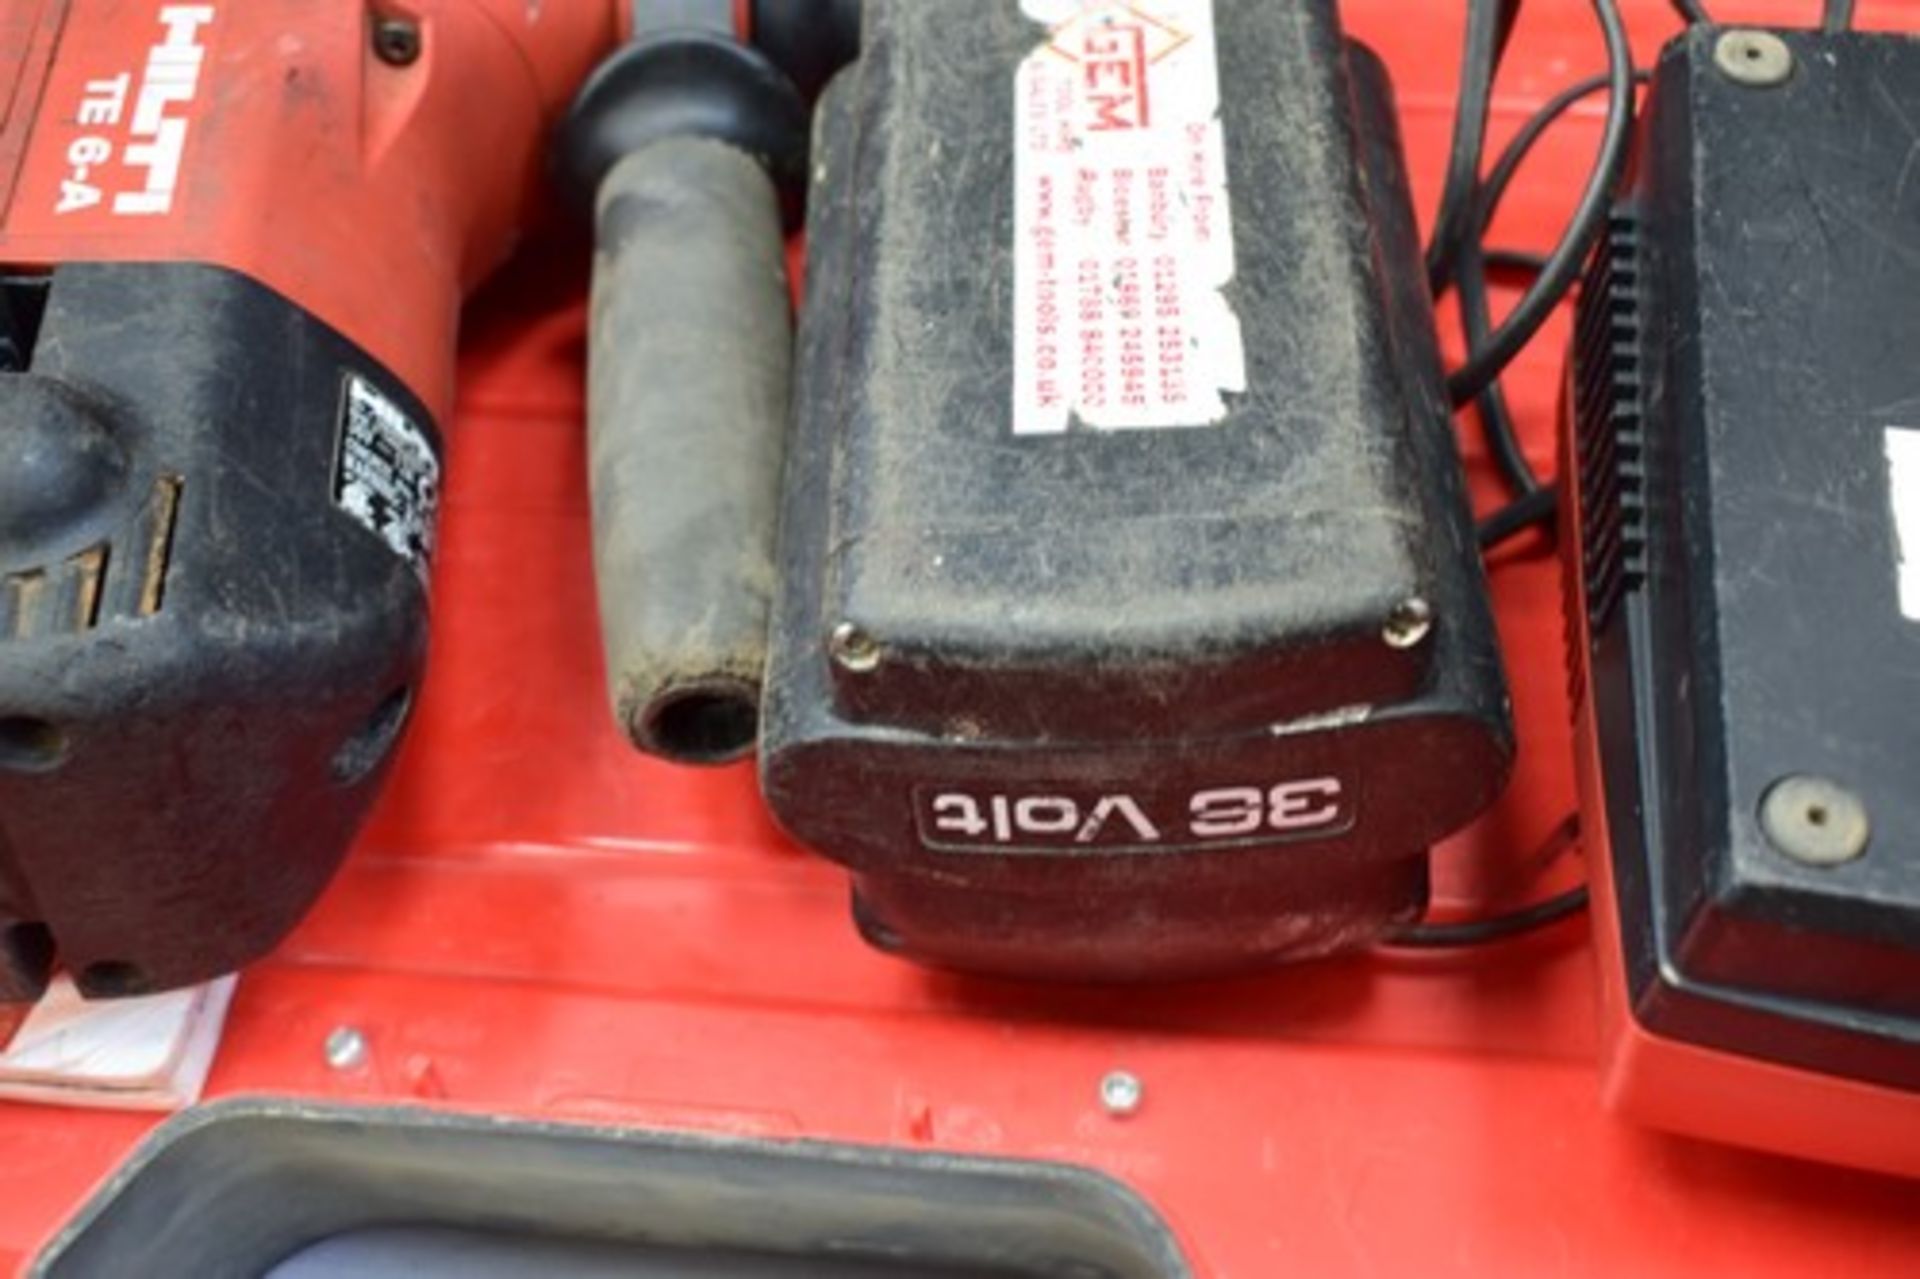 1 x Hilti cordless hammer drill, model: TE 6-A, 36v 12amp and charger - working, sold with a faulty - Image 3 of 3